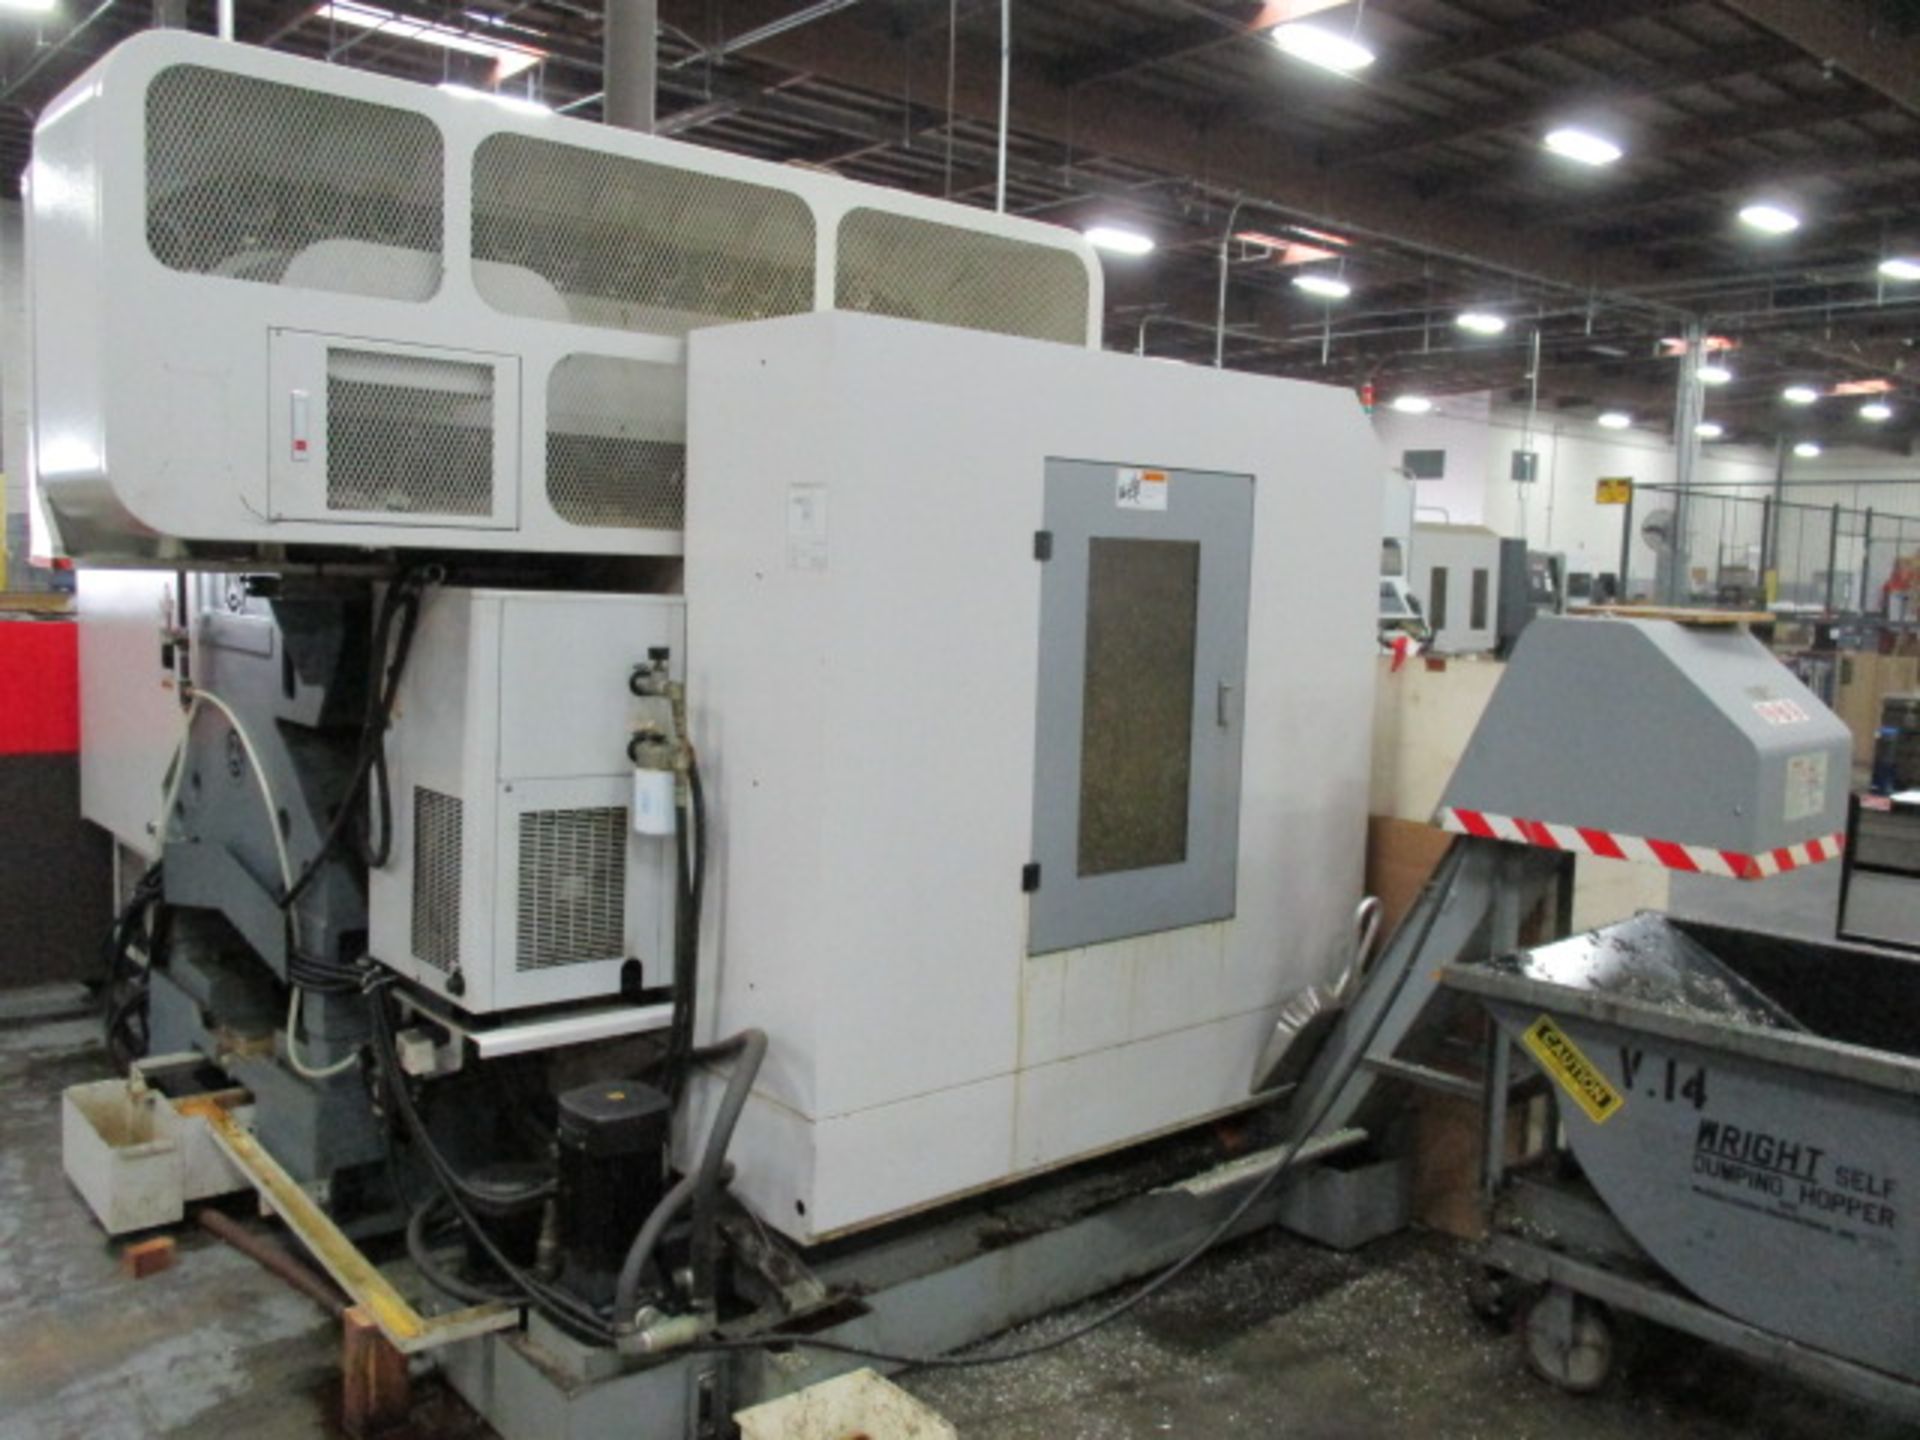 YAMA SEIKI VMB-1200-50T CNC MACHINING CENTER, VERTICAL, YEAR-2007, S/N-7126, 3-AXIS, 15-HP, 6,000- - Image 7 of 8